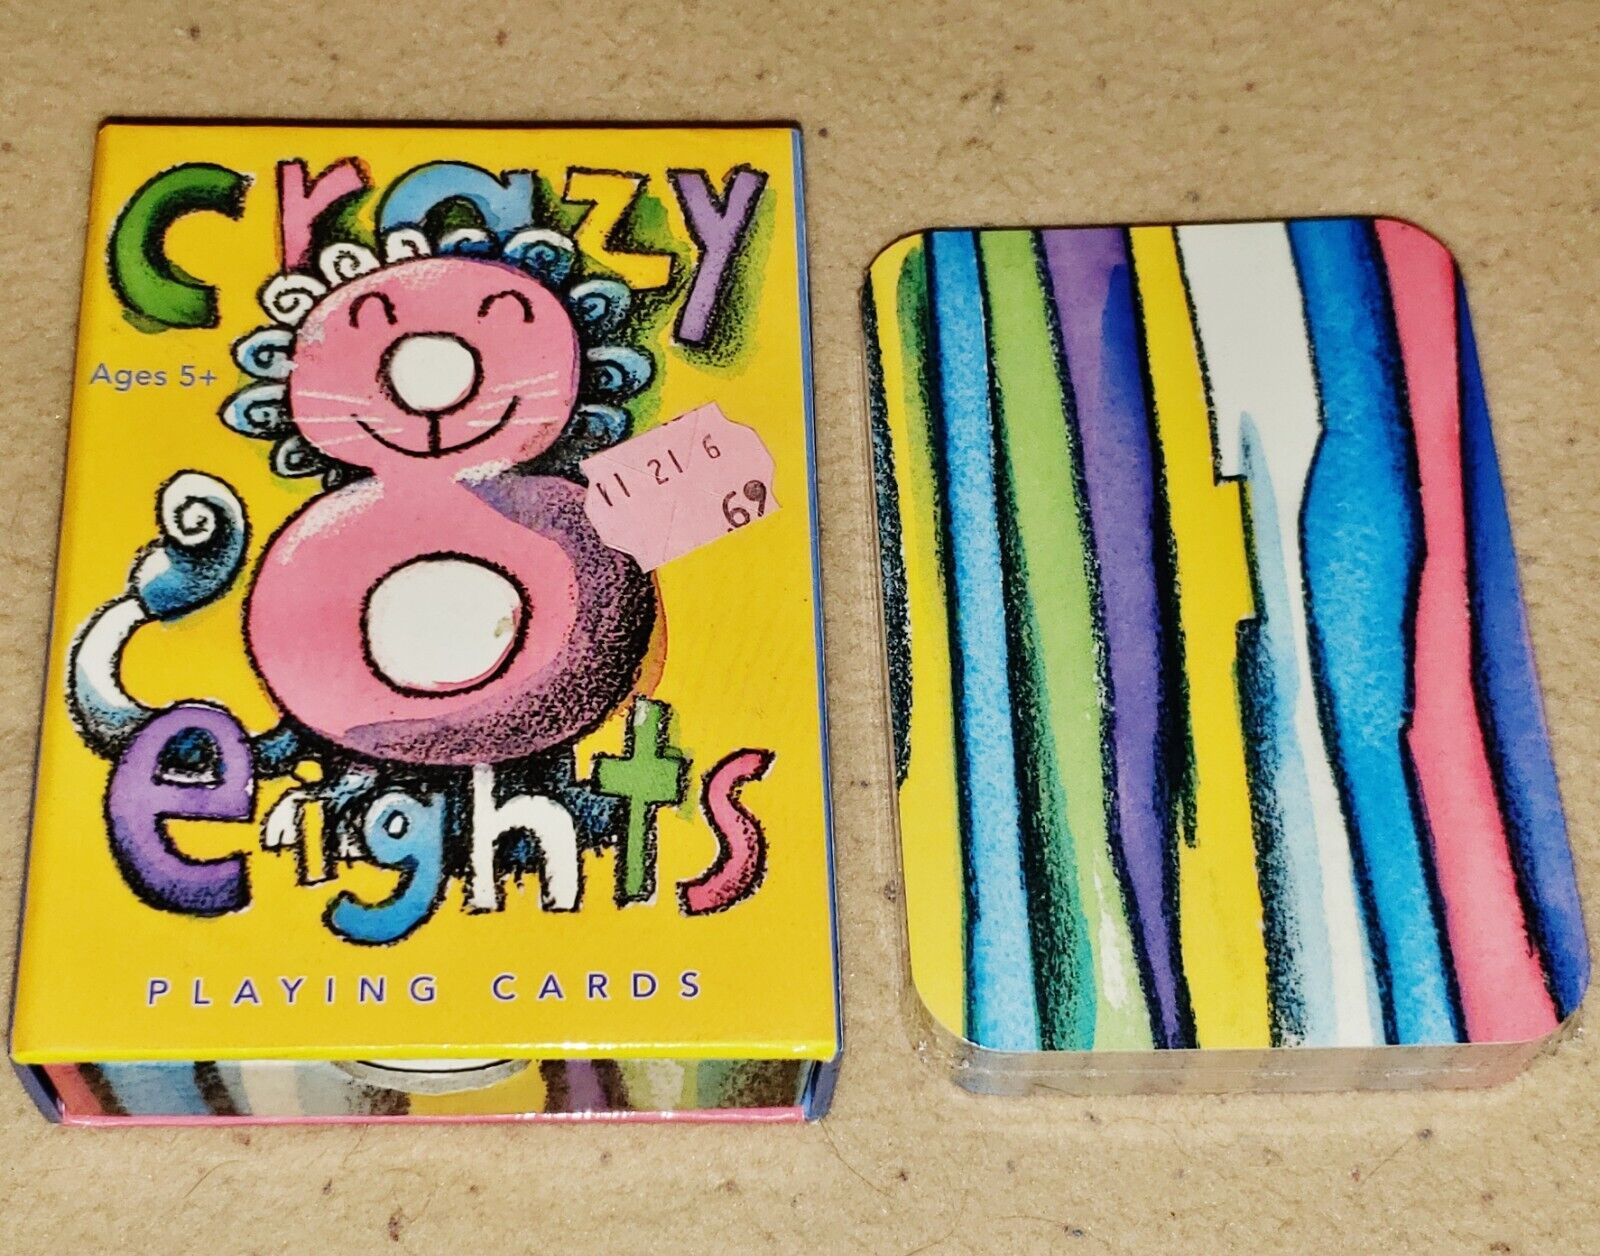 2002 Crazy Eights Playing Cards, Sealed in Original Box - Fun Artistic Design